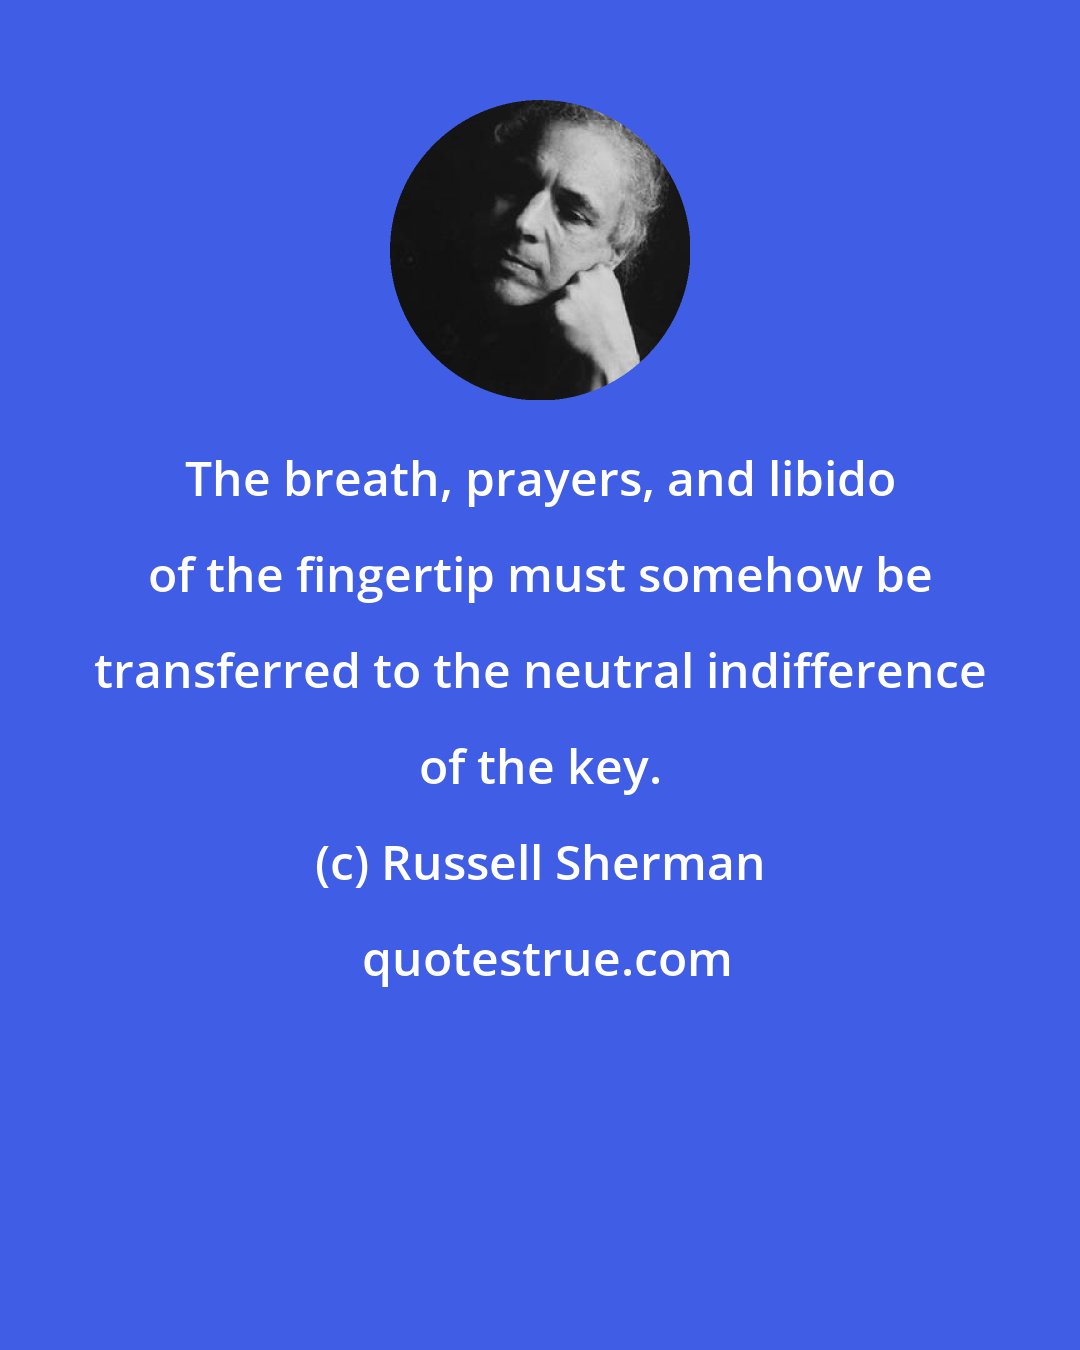 Russell Sherman: The breath, prayers, and libido of the fingertip must somehow be transferred to the neutral indifference of the key.